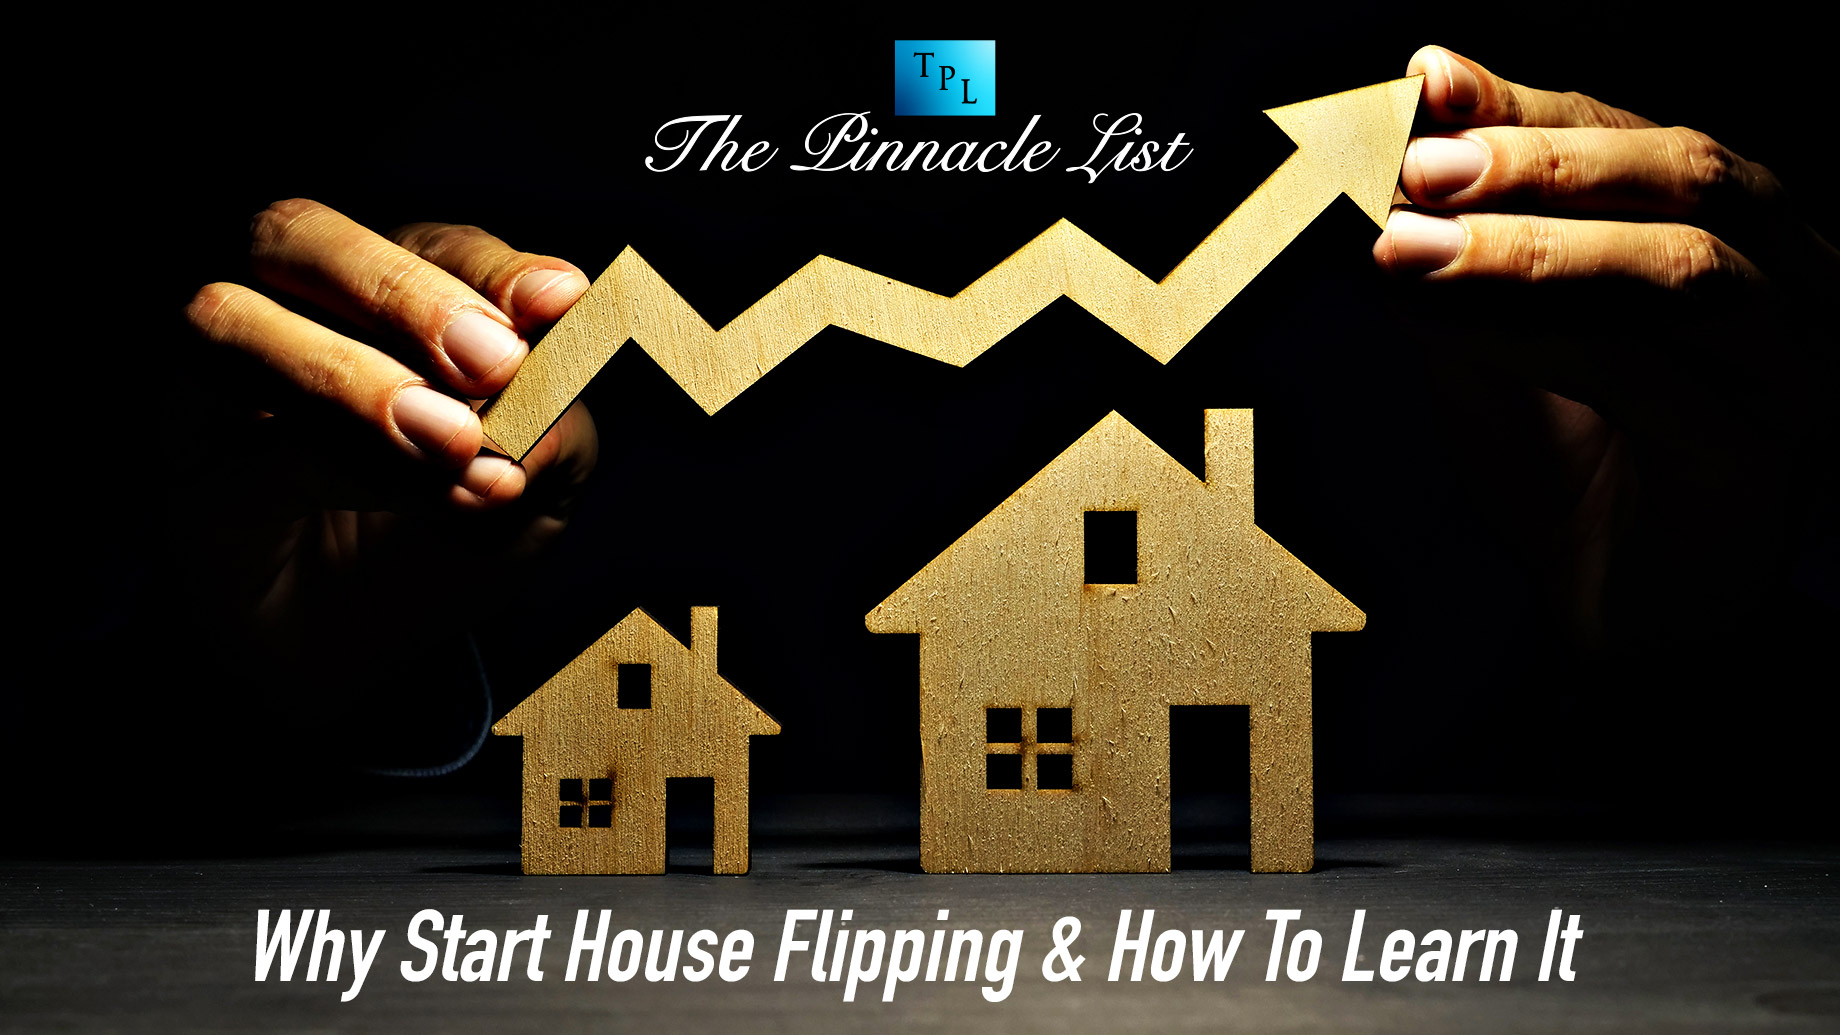 Why Start House Flipping & How To Learn It